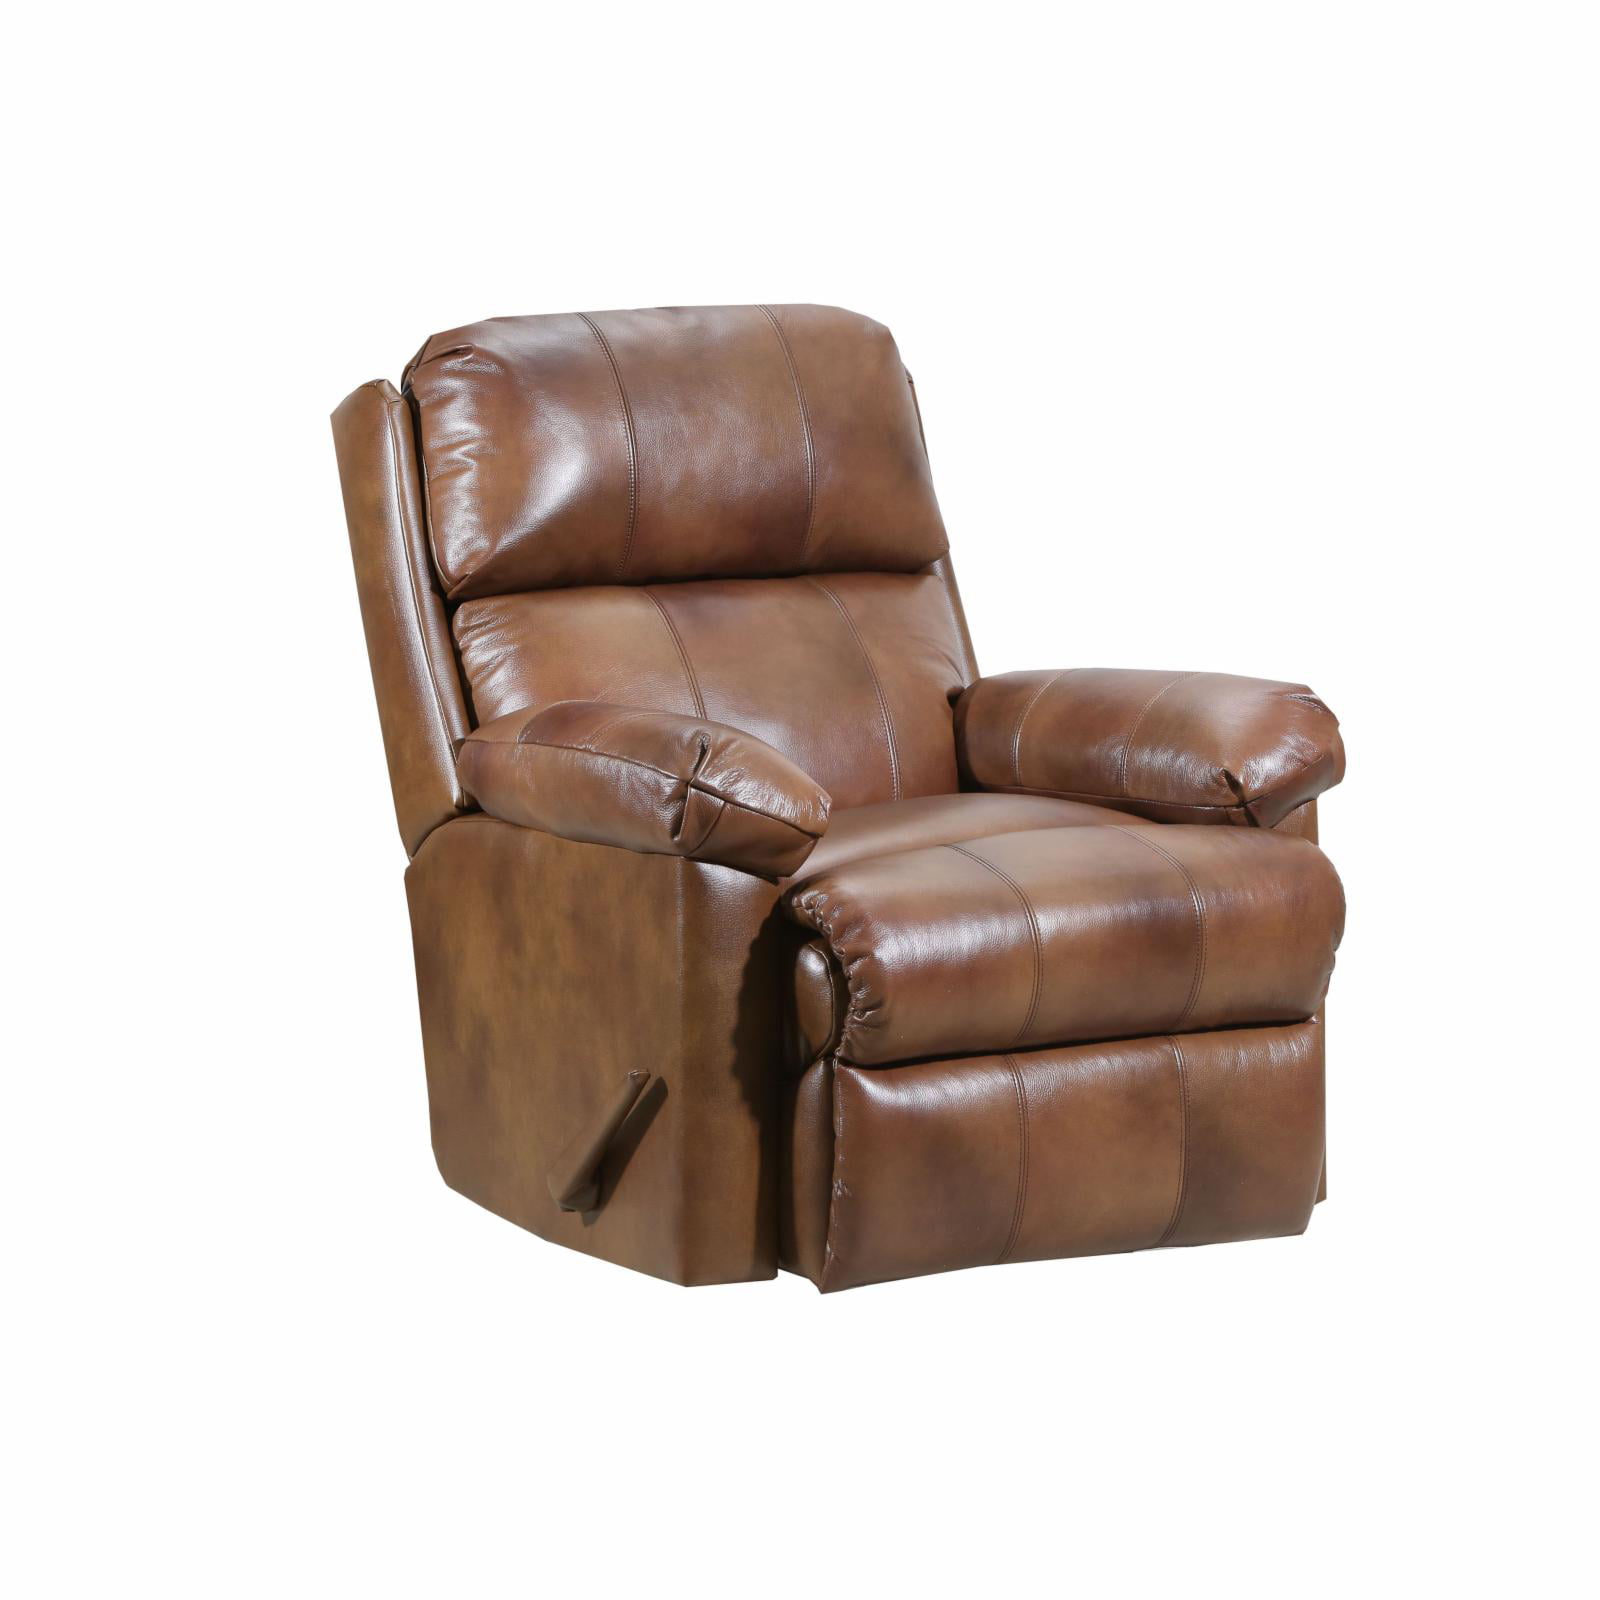 Lane Soft Touch Rocker Recliner, Lane Recliner With Ottoman Leather